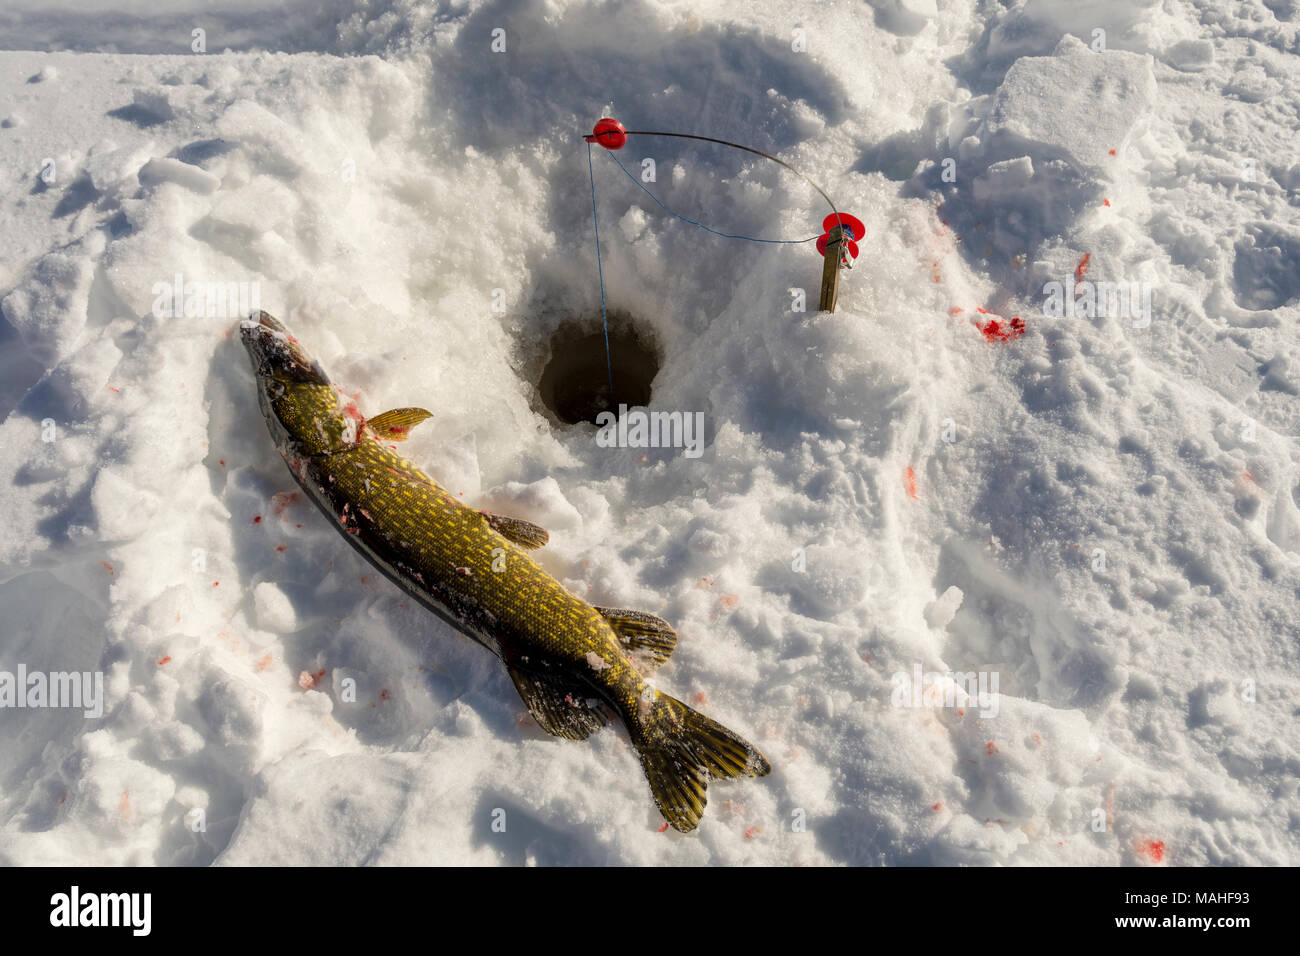 Dead pike on ice from above close to a hole in the ice prepared